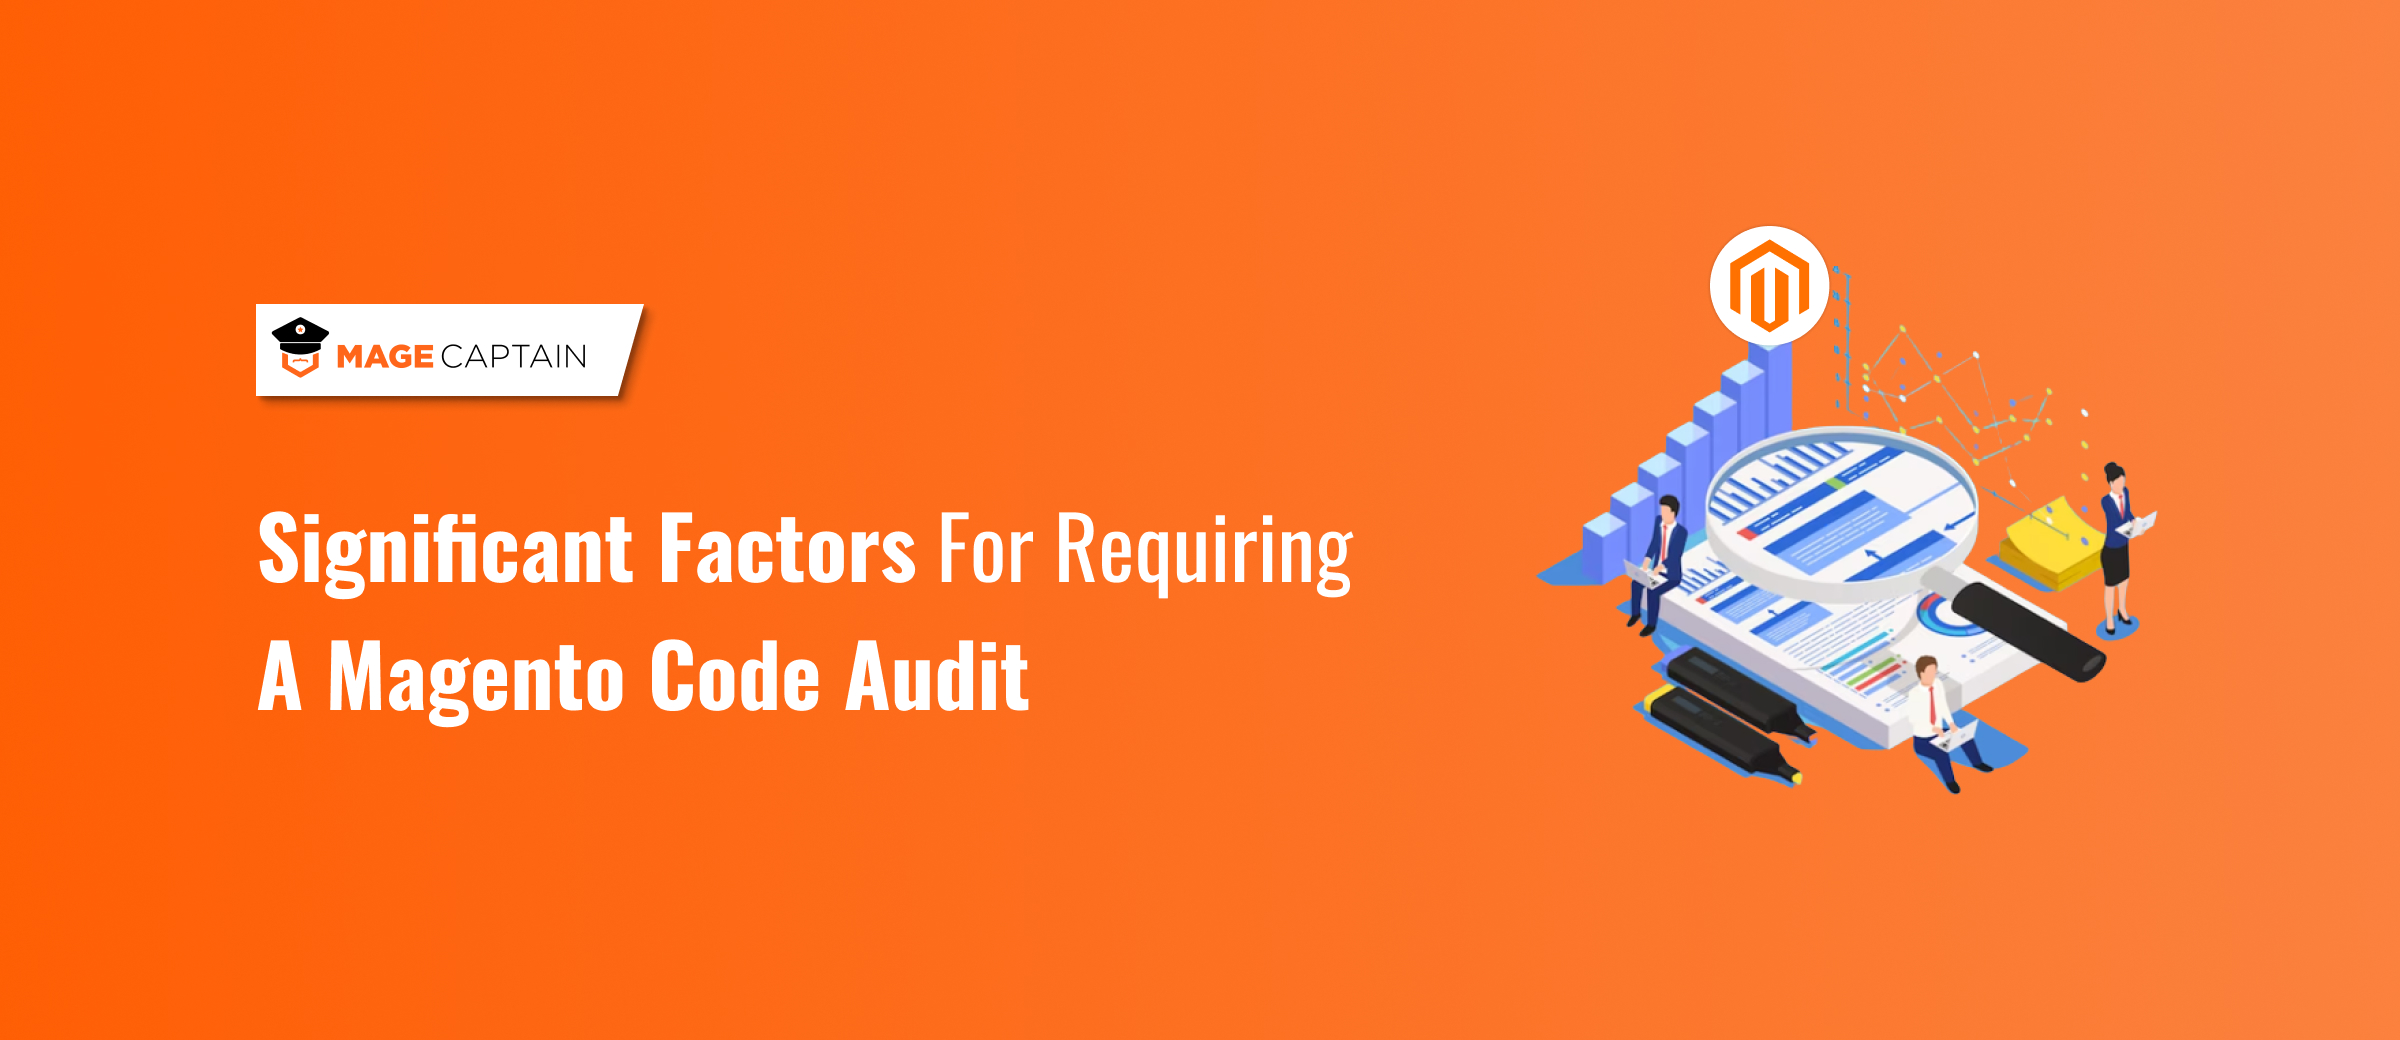 Significant Factors for Requiring a Magento code audit